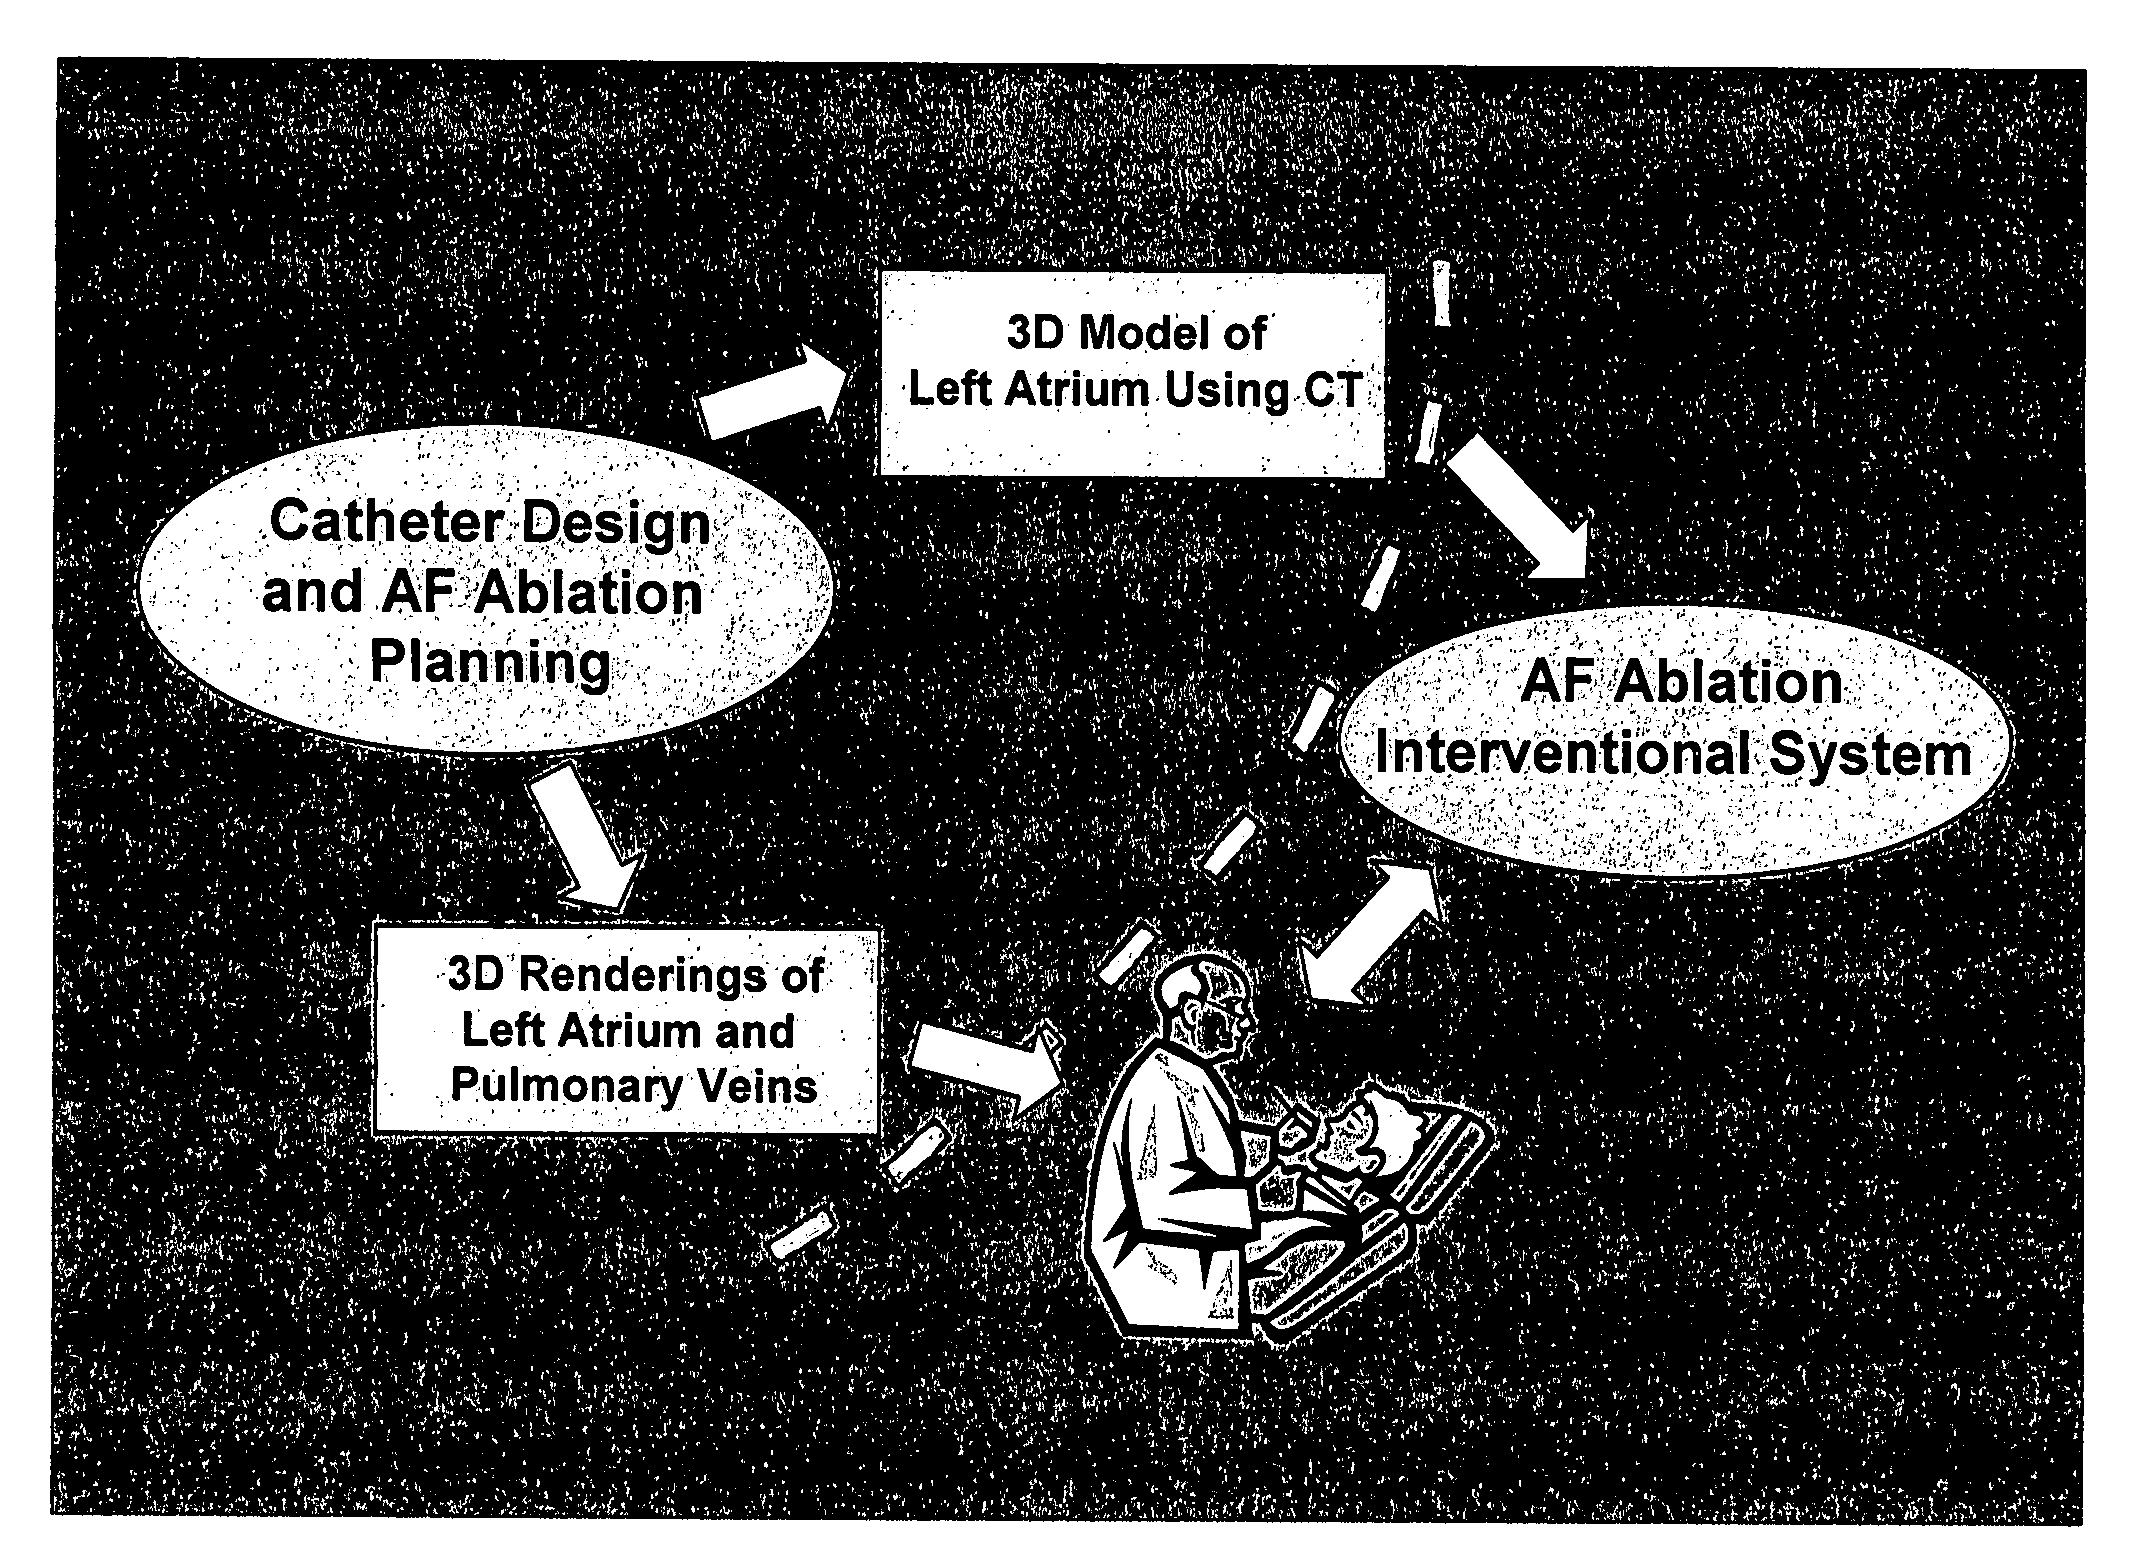 Method for pulmonary vein isolation and catheter ablation of other structures in the left atrium in atrial fibrillation